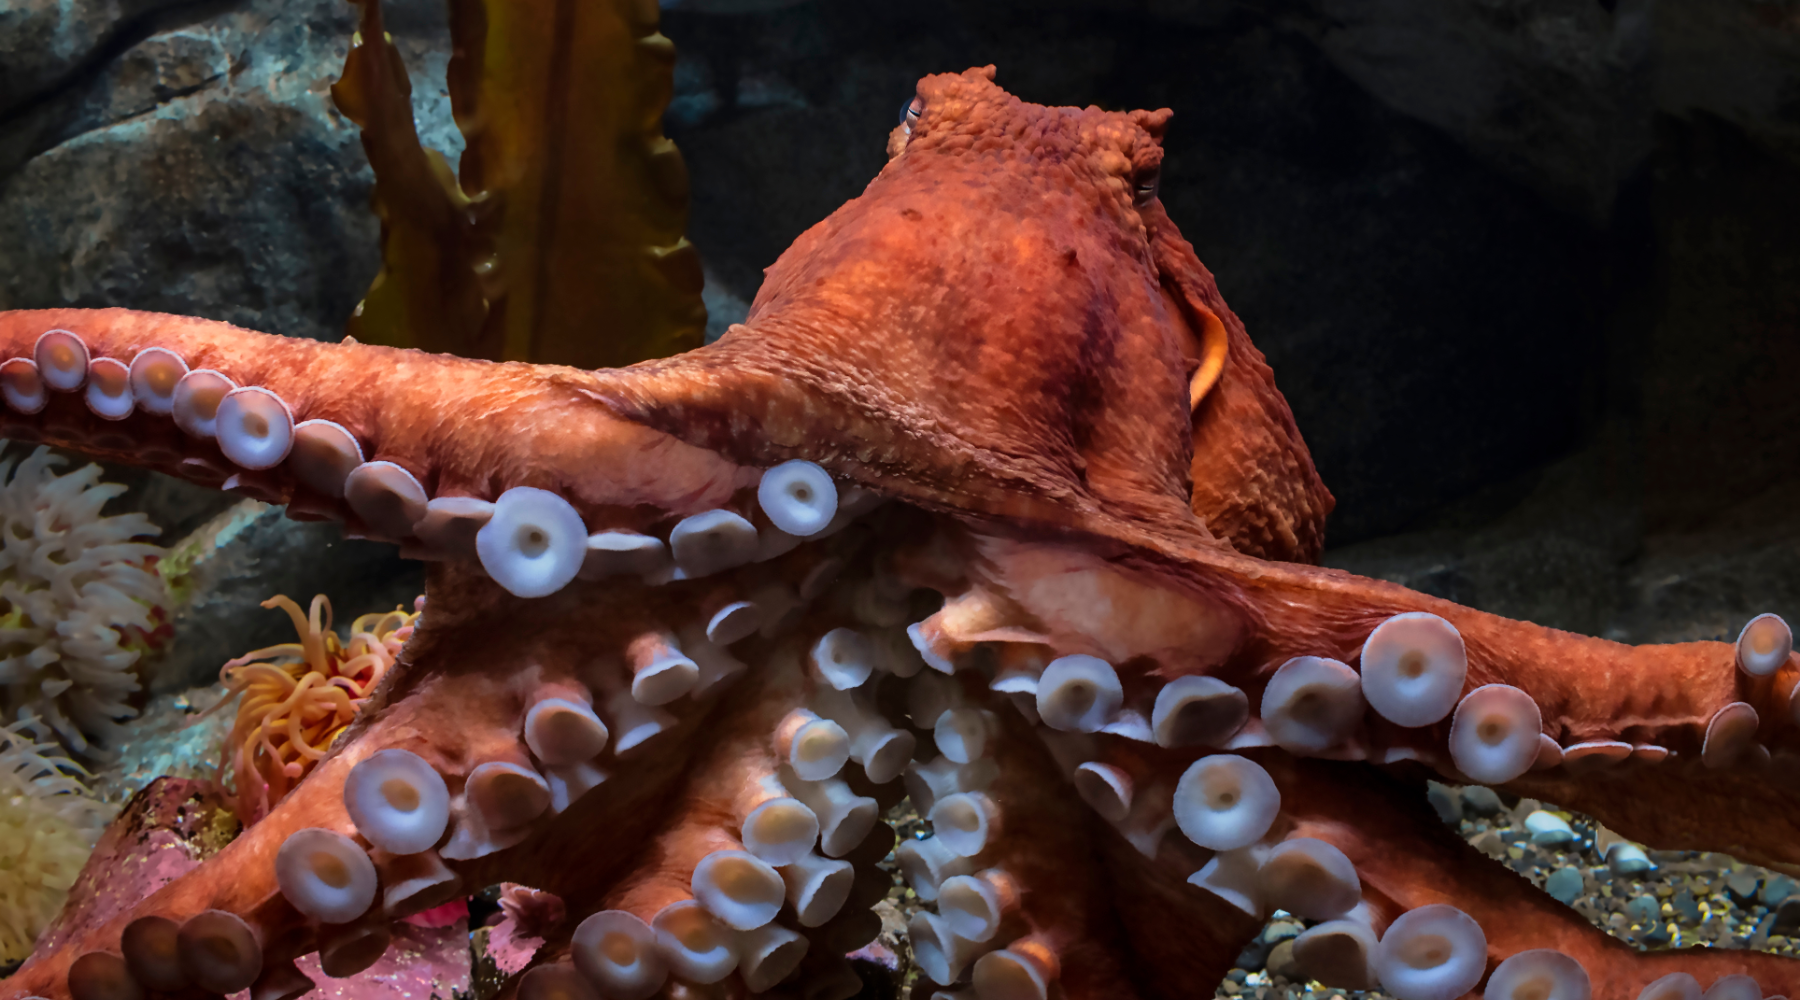 Giant Pacific Octopus - the biggest octopus in the world